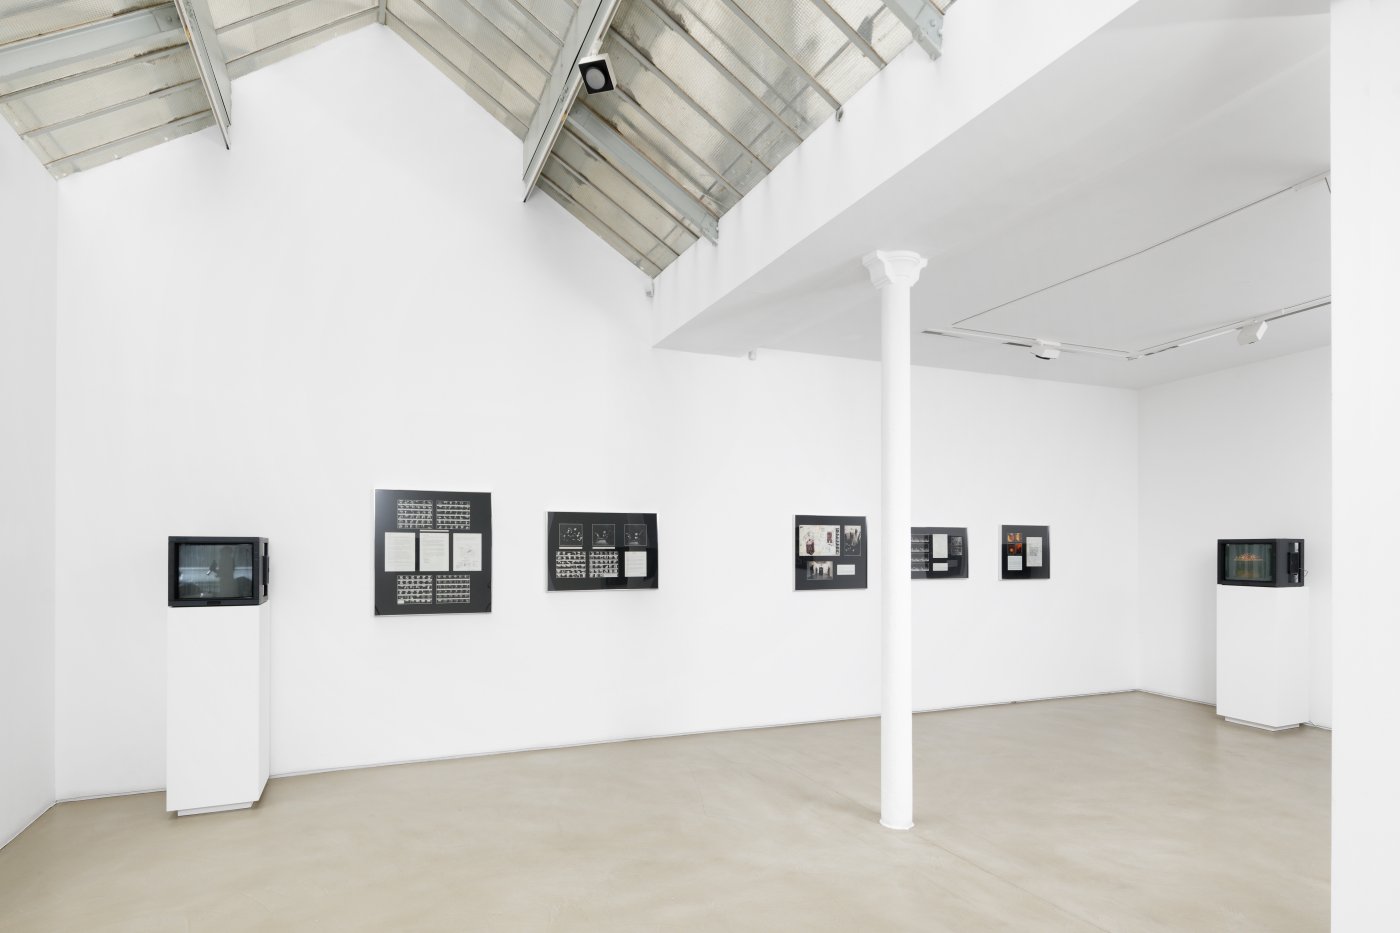 Installation image for Mona Hatoum: Performance Documents, 1980-1987/2013, at Galerie Chantal Crousel